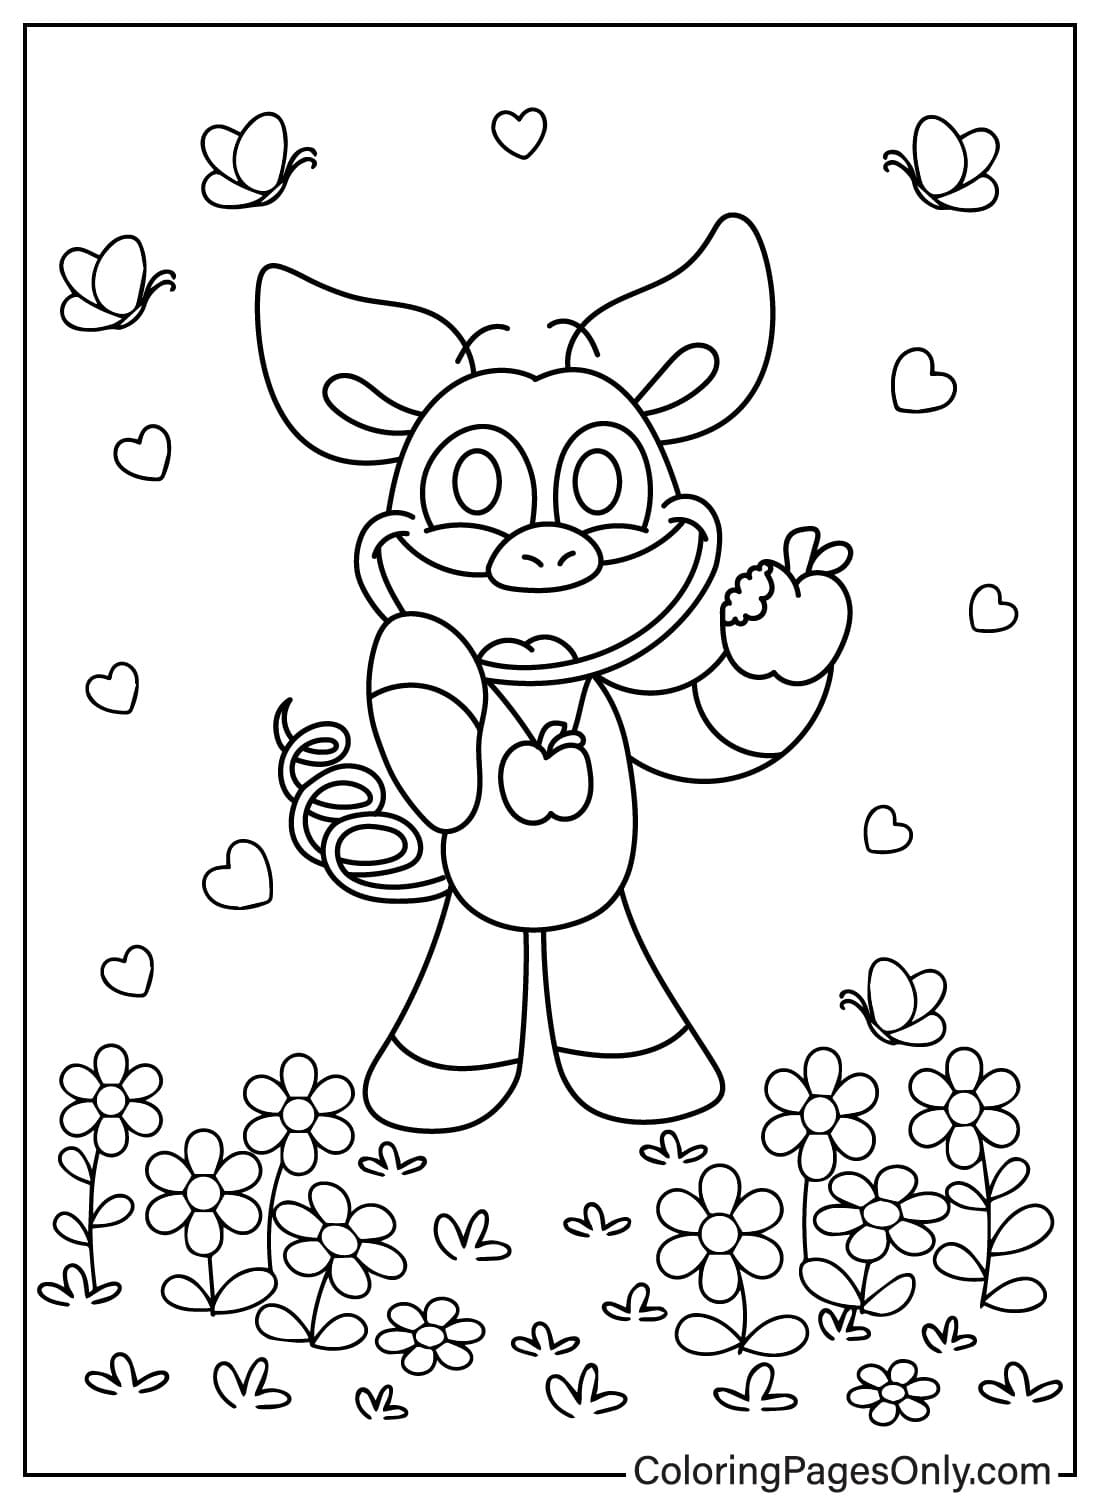 PickyPiggy Coloring Page Eating Apples in the Flower Garden from PickyPiggy